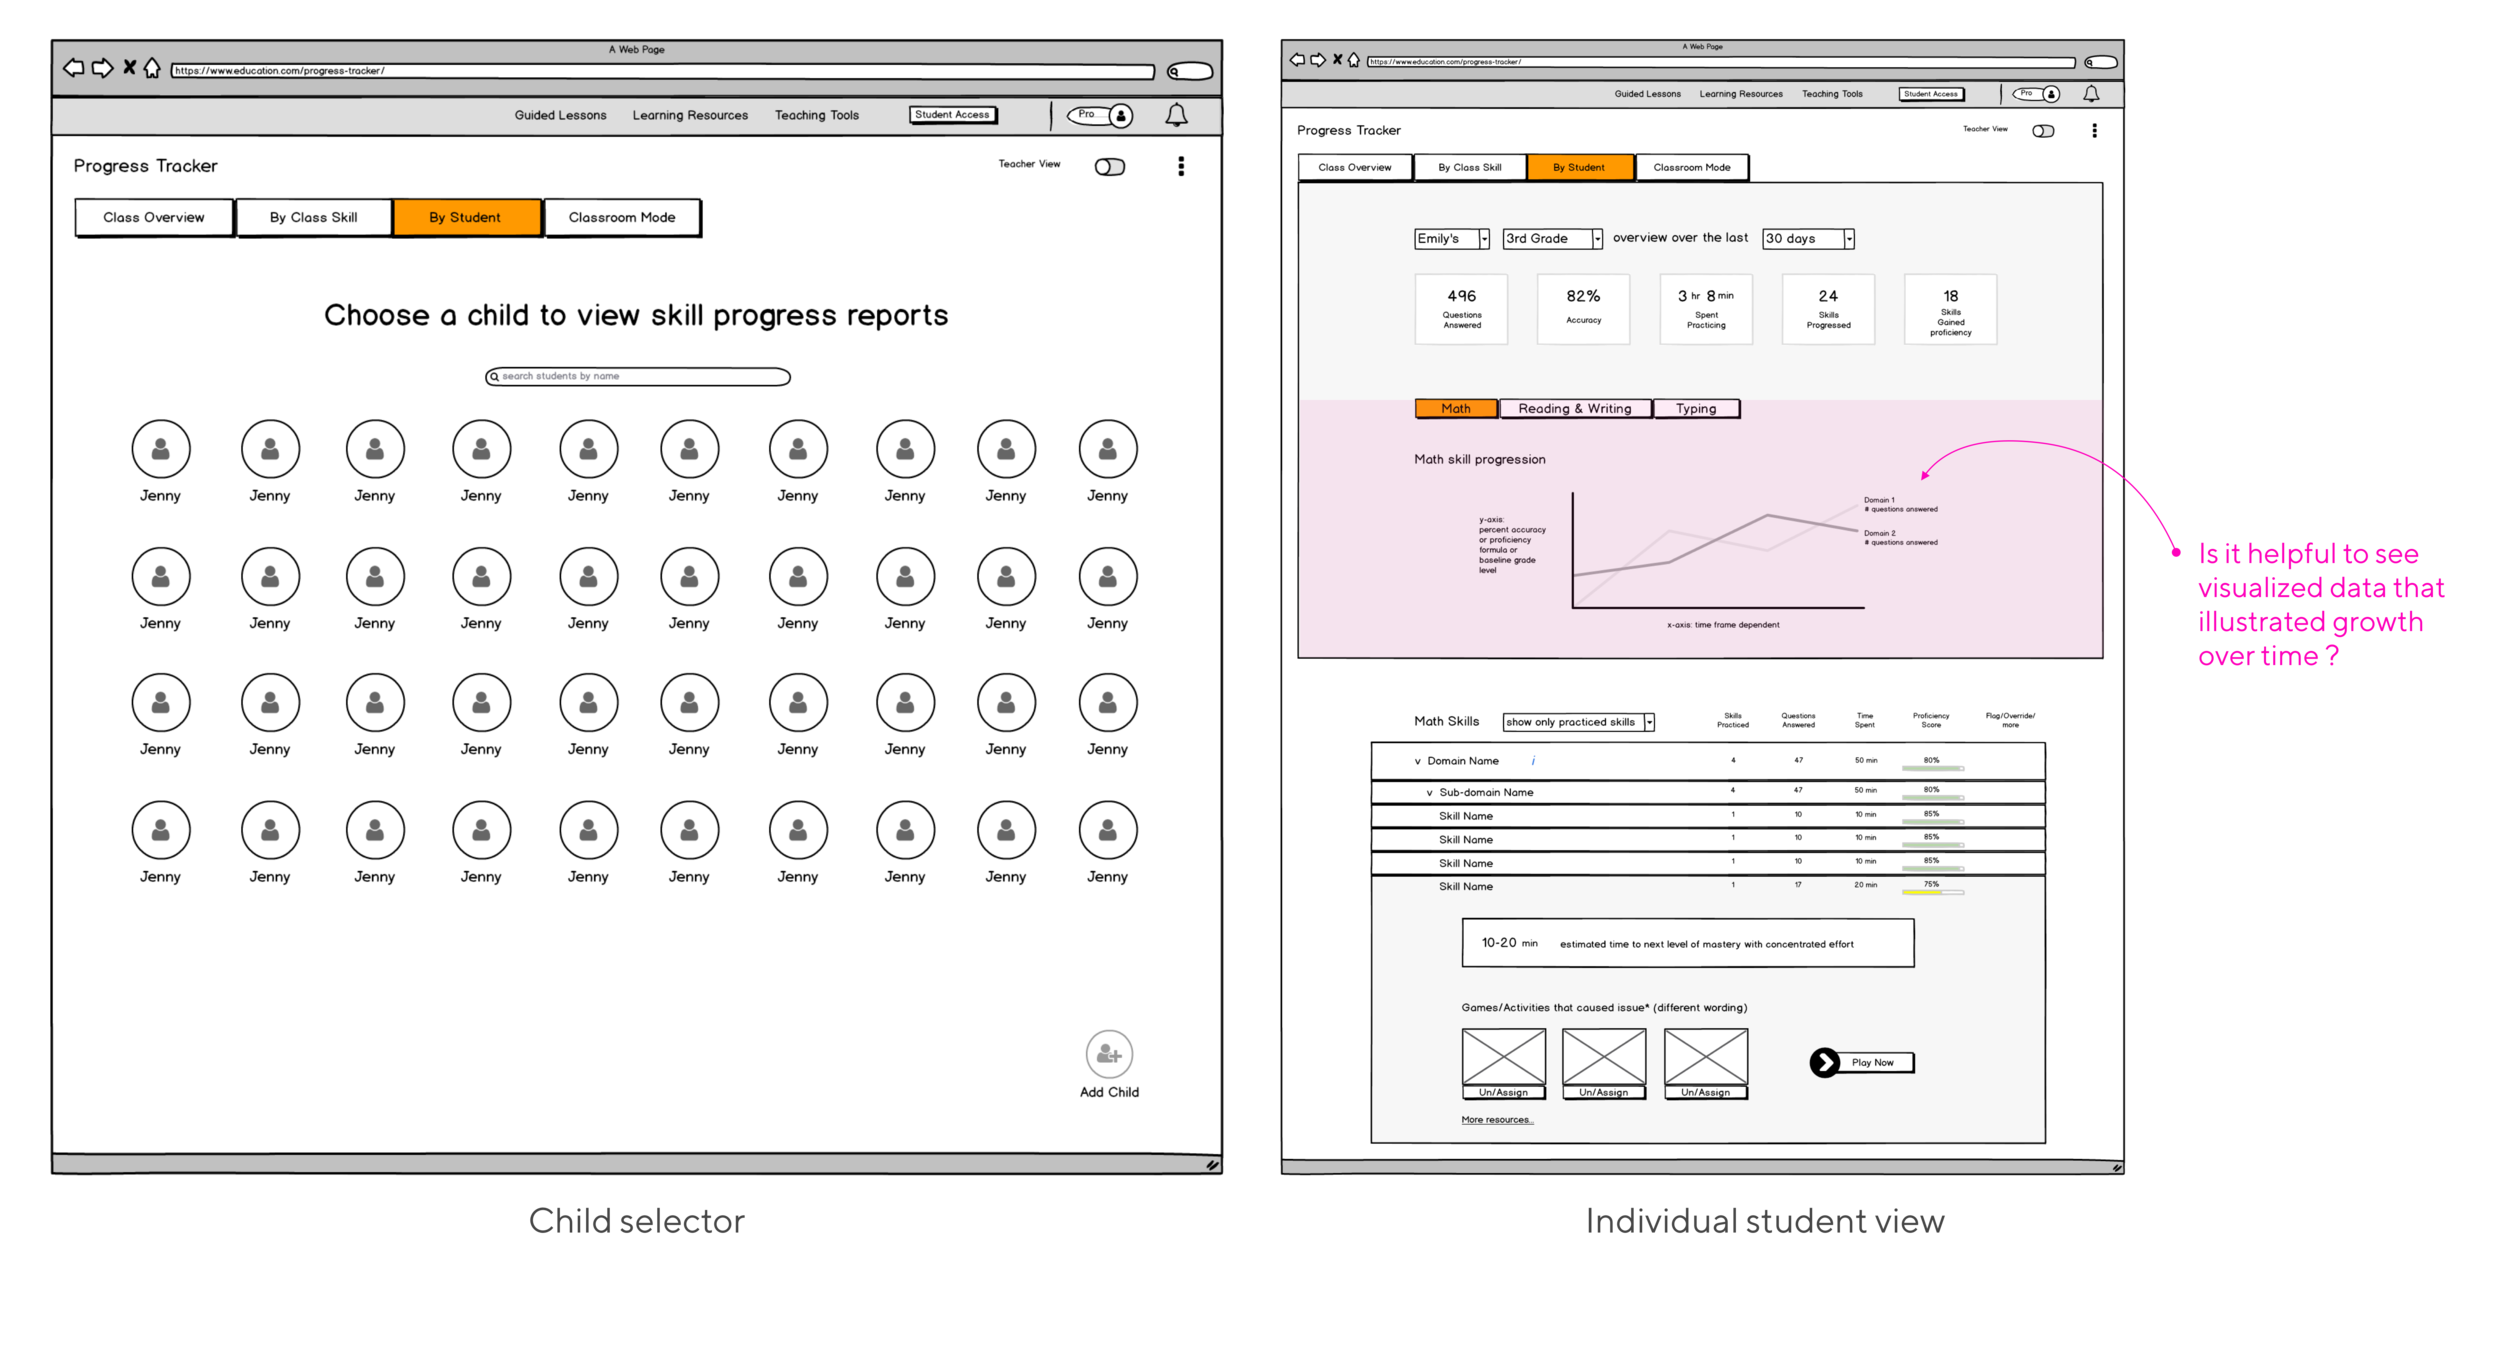 pt-teachers-wireframes-1-student-view.png